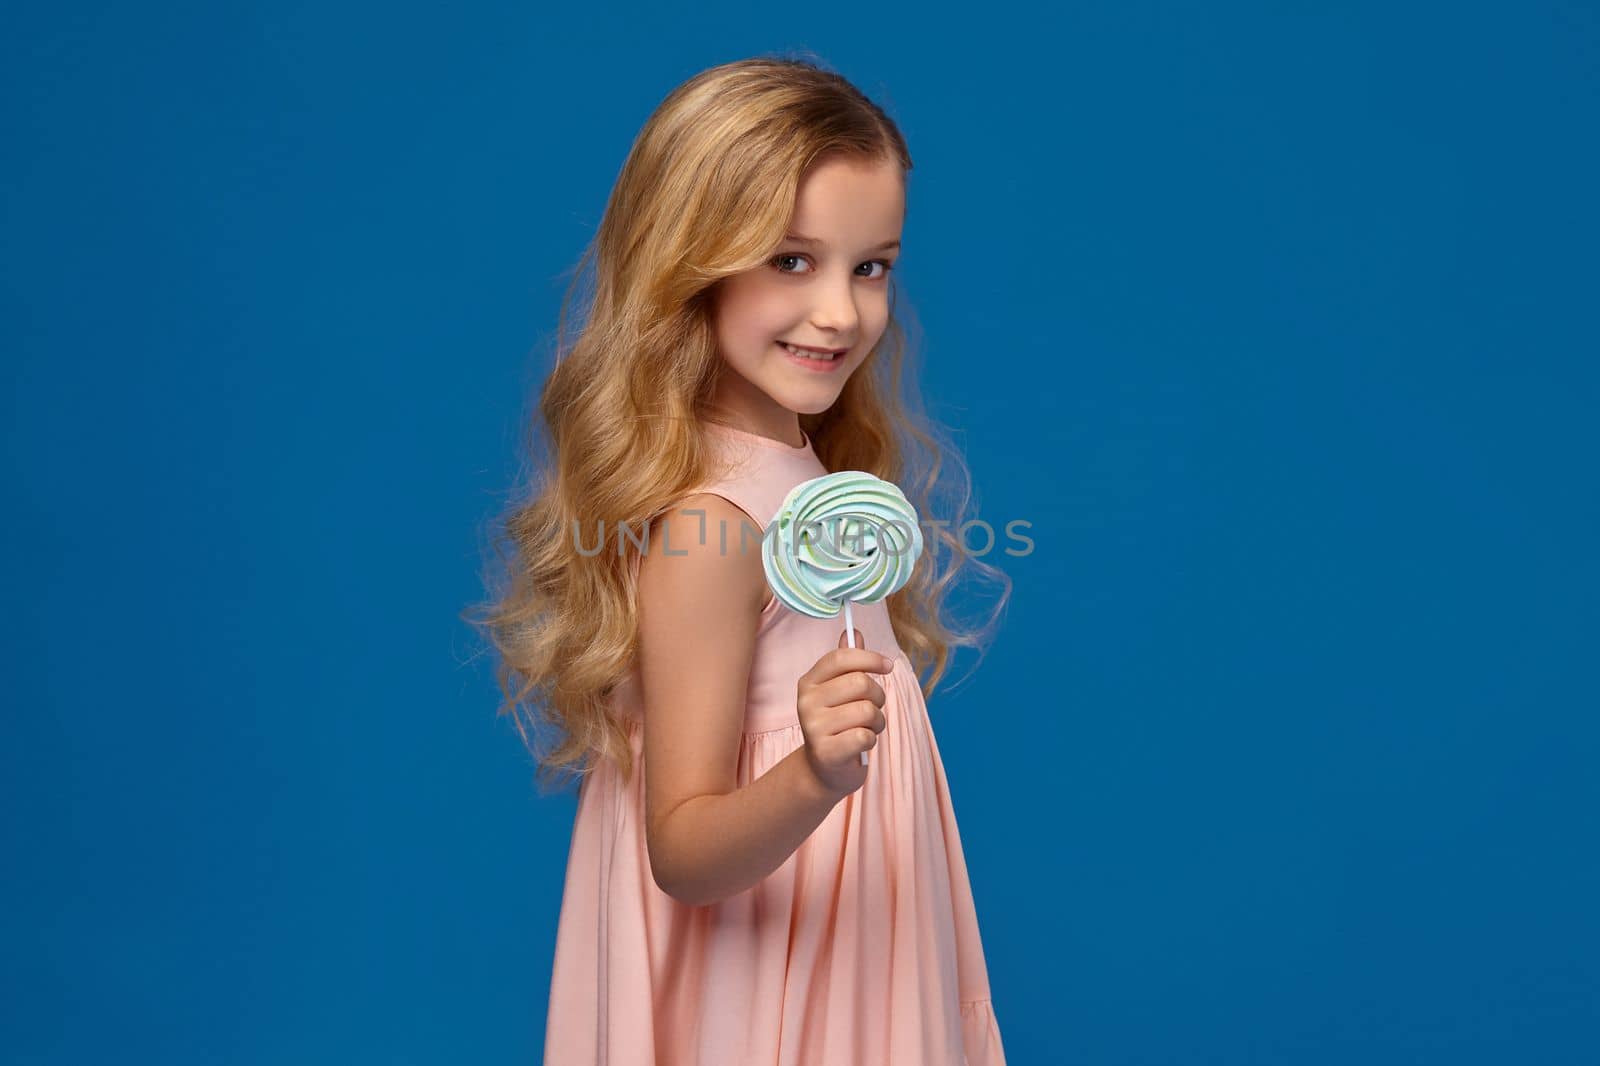 Little girl in a pink dress is holding a candy and showing it off at the camera, on a blue background.